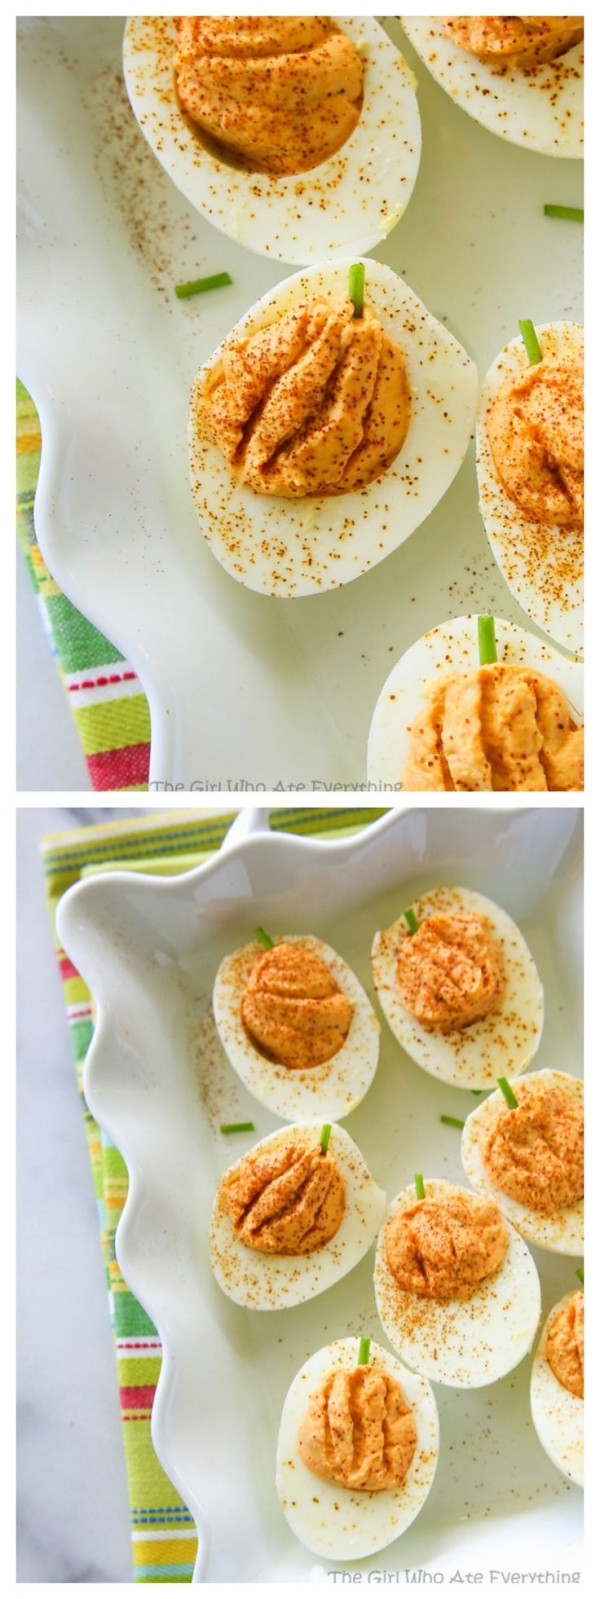 Thanksgiving Deviled Eggs
 These Roasted Red Pepper Deviled Eggs are naturally